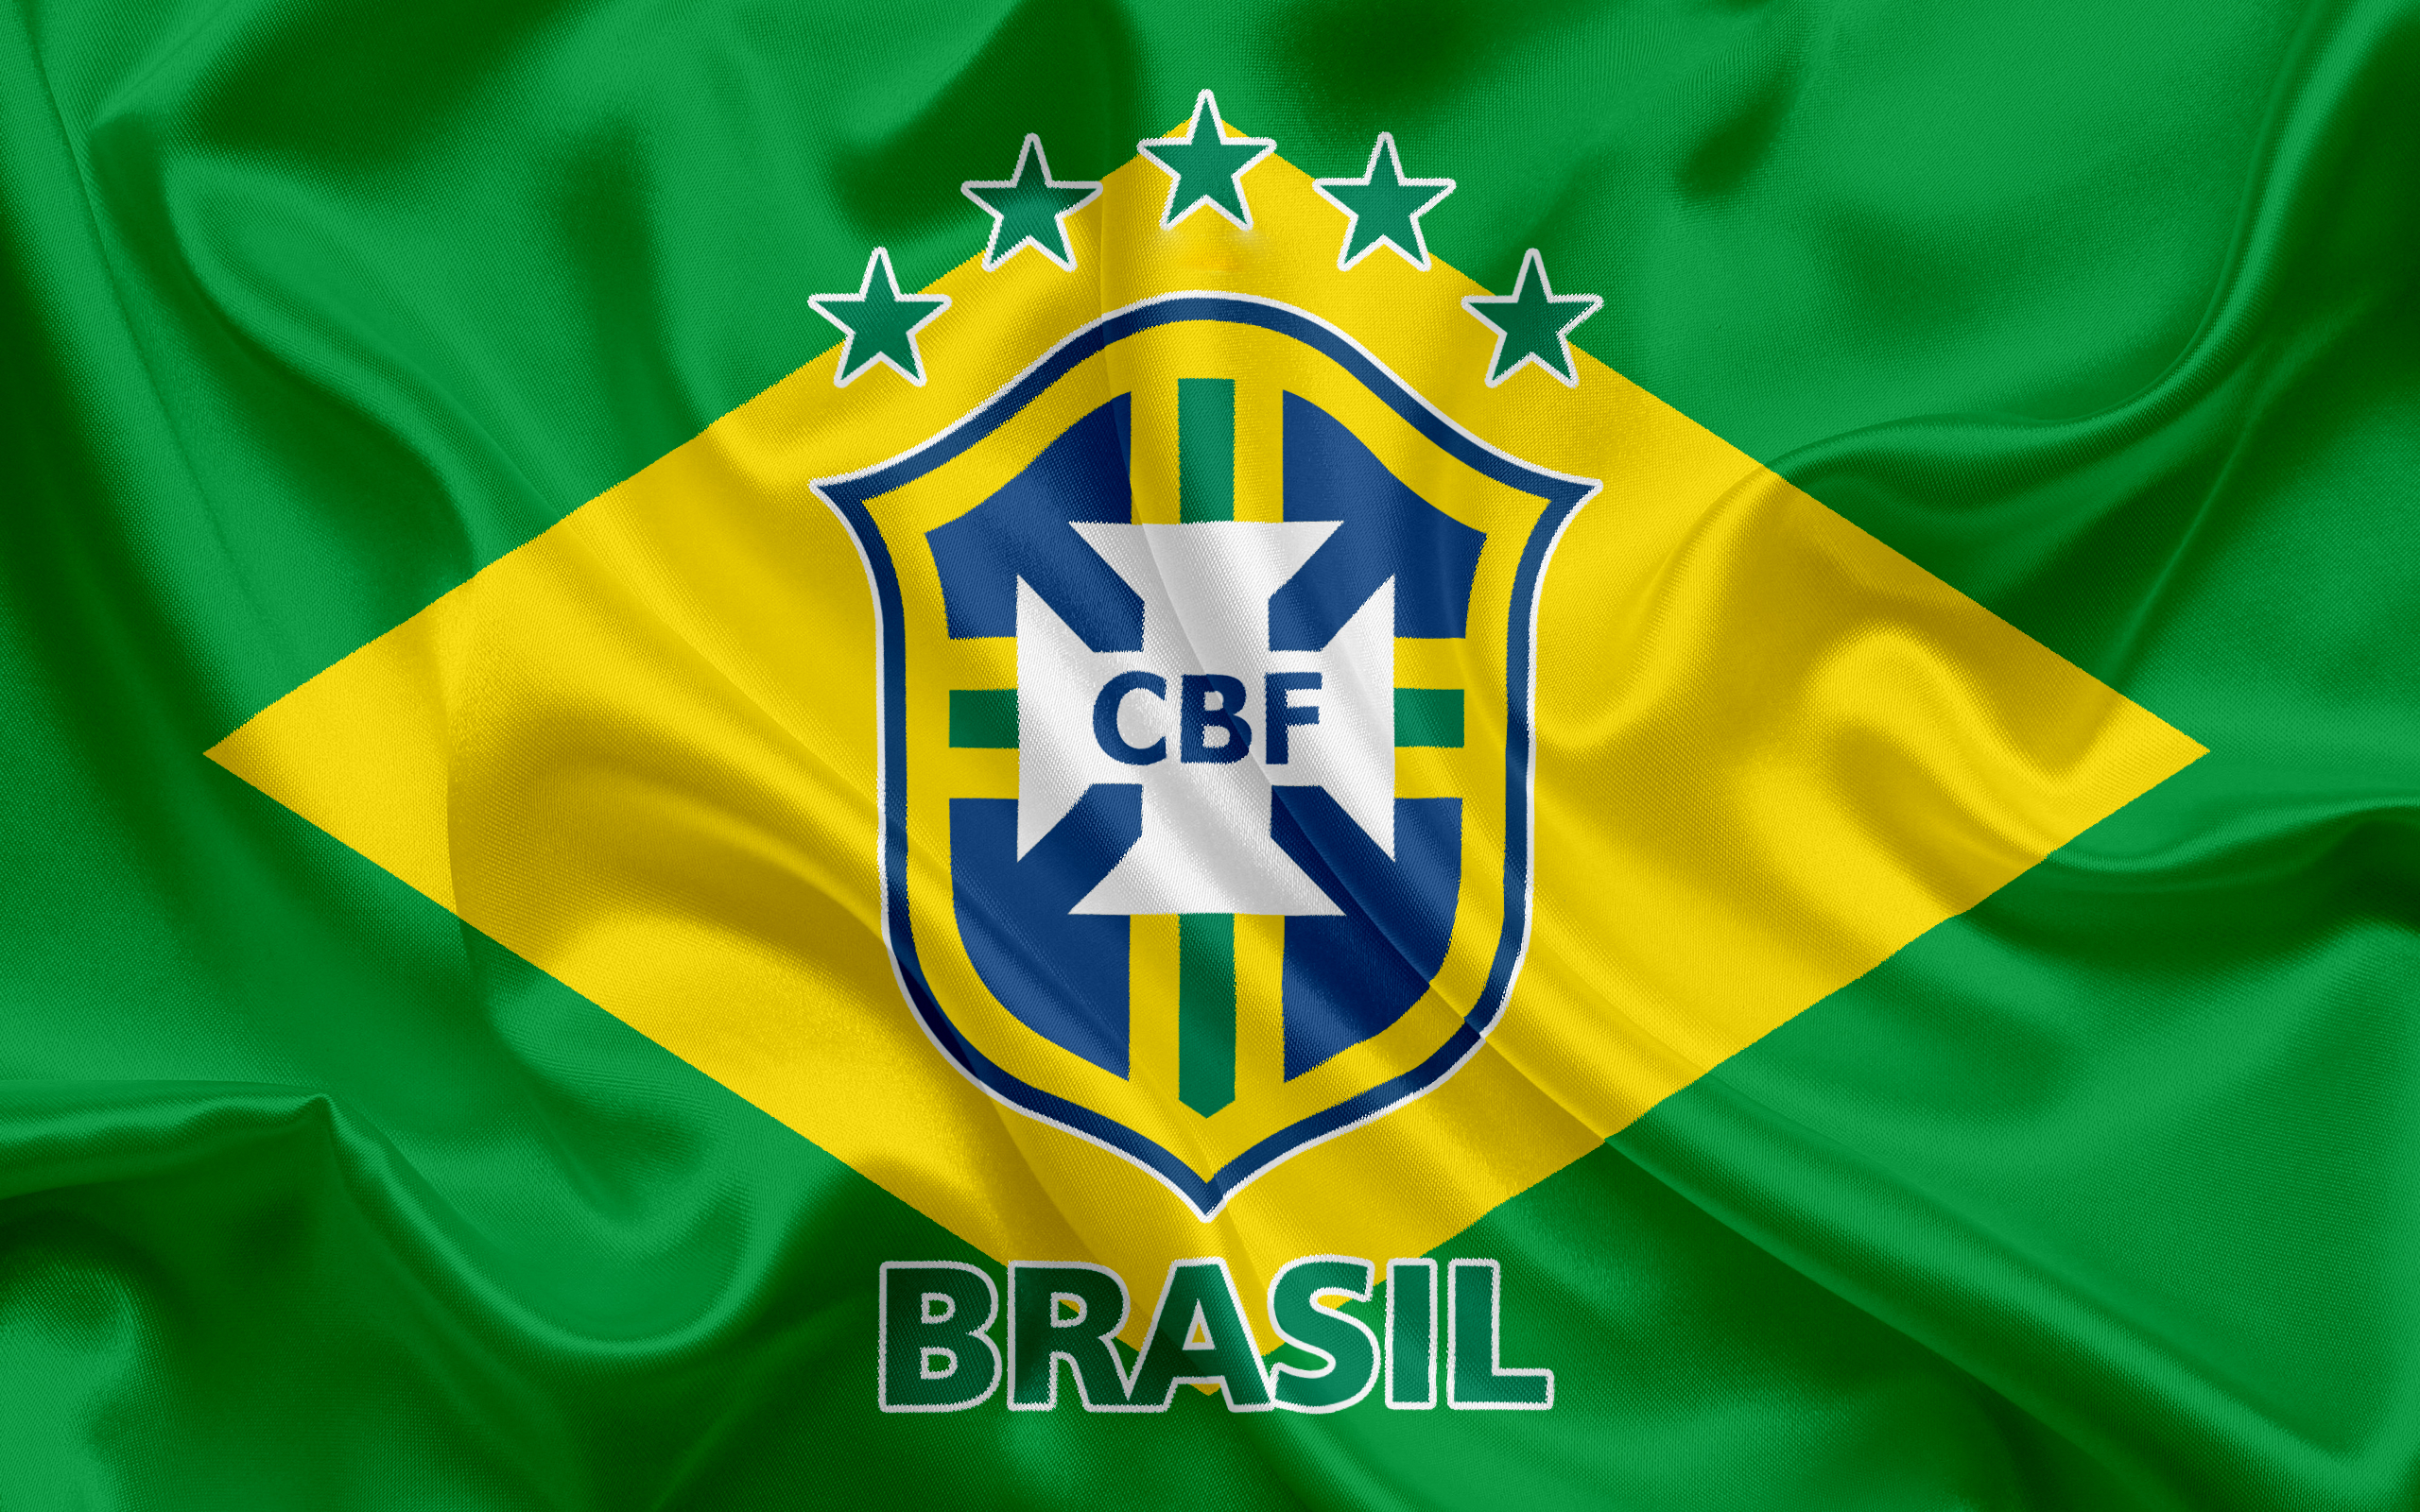 Brazil National Football Team wallpapers for desktop, download free Brazil  National Football Team pictures and backgrounds for PC 